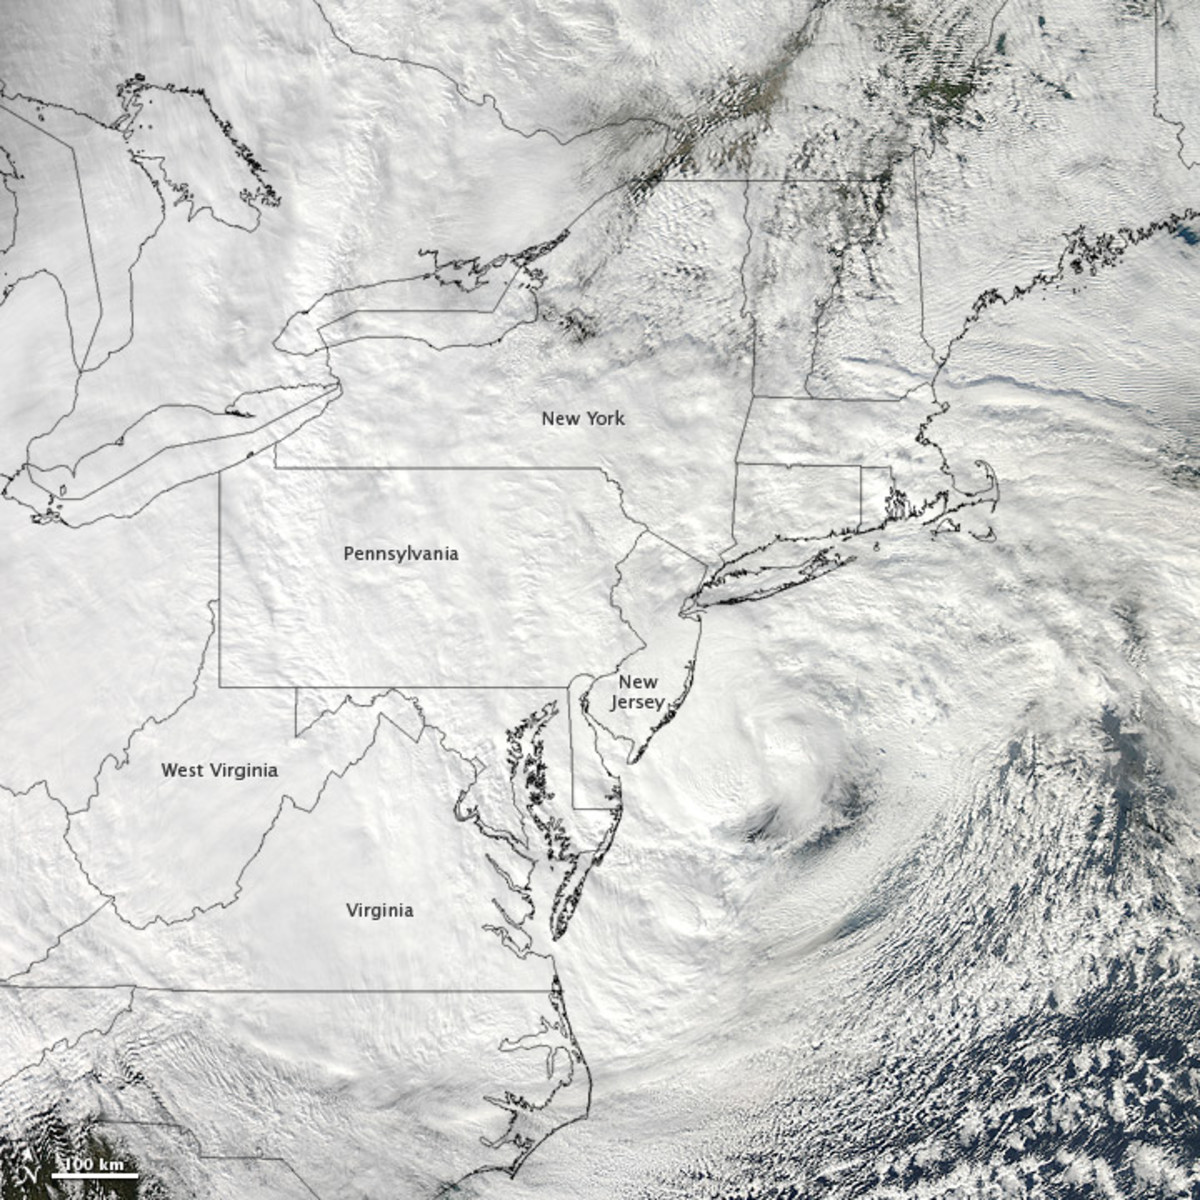 Hurricane Sandy is twice the size of the state of Texas.